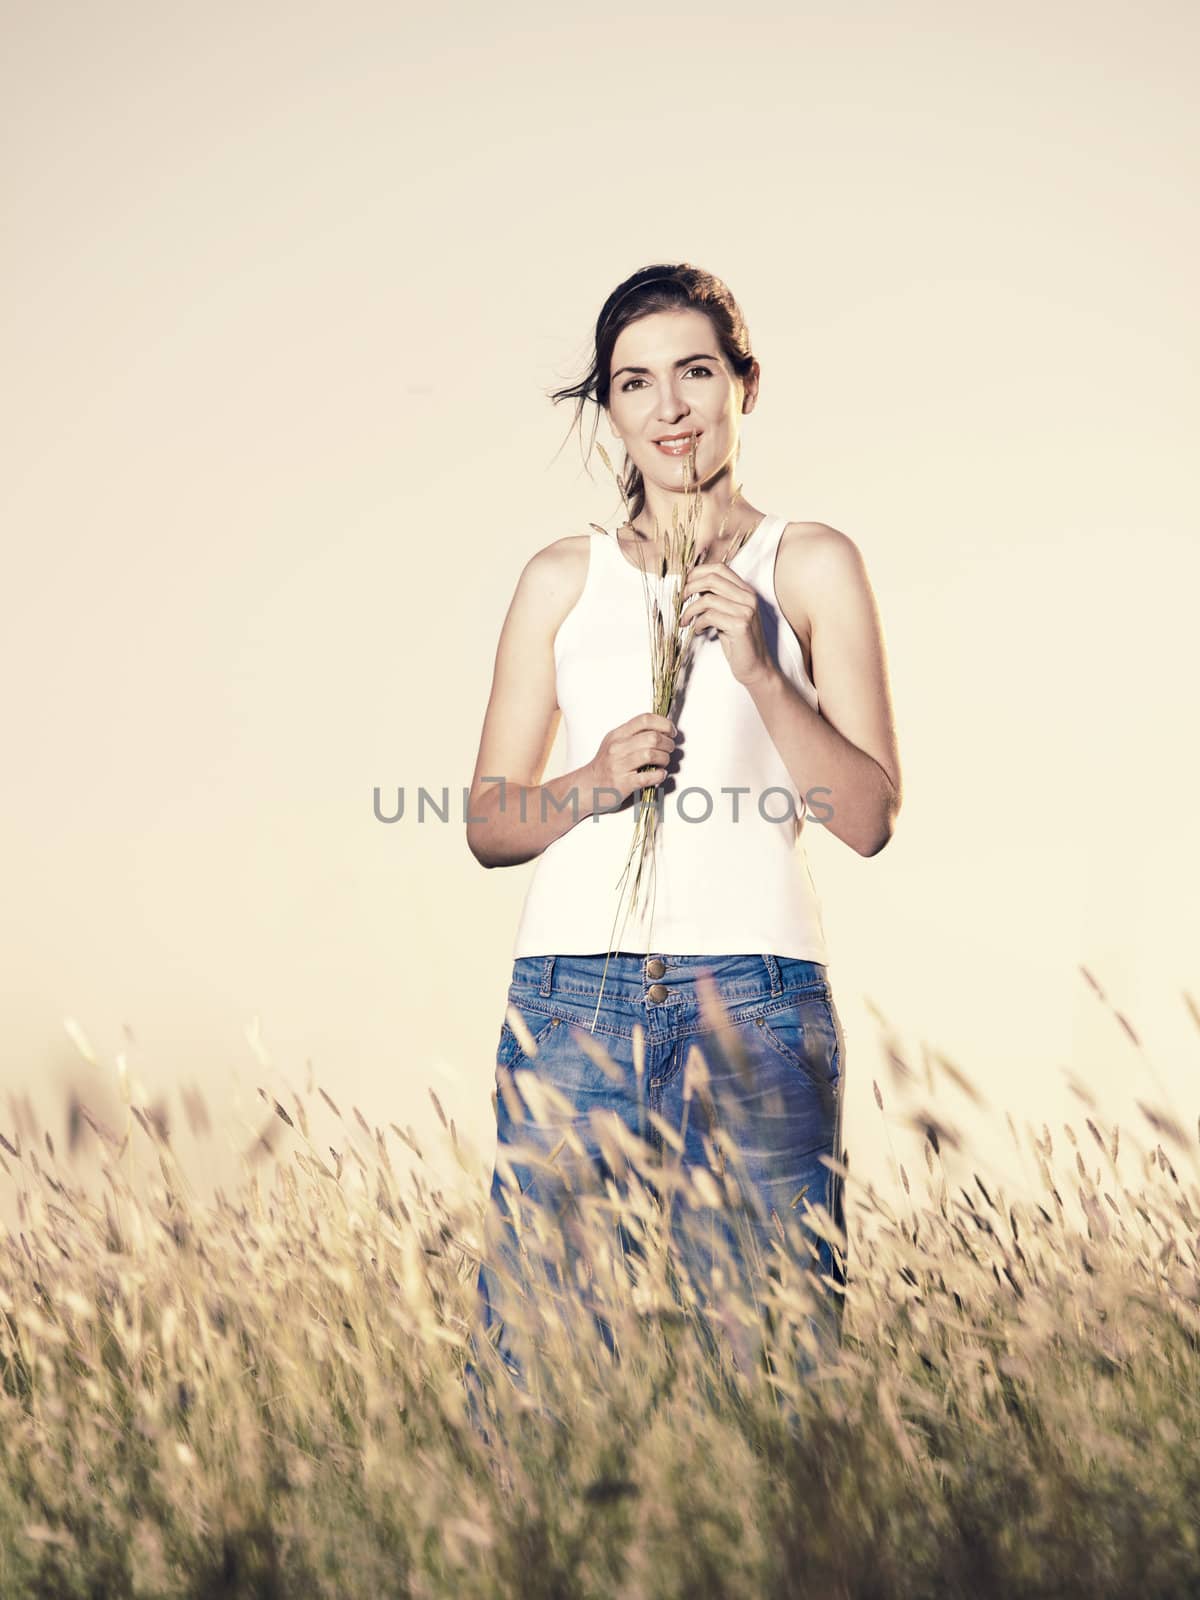 Outdoor portrait of a beautiful woman holding flowers on a summer day